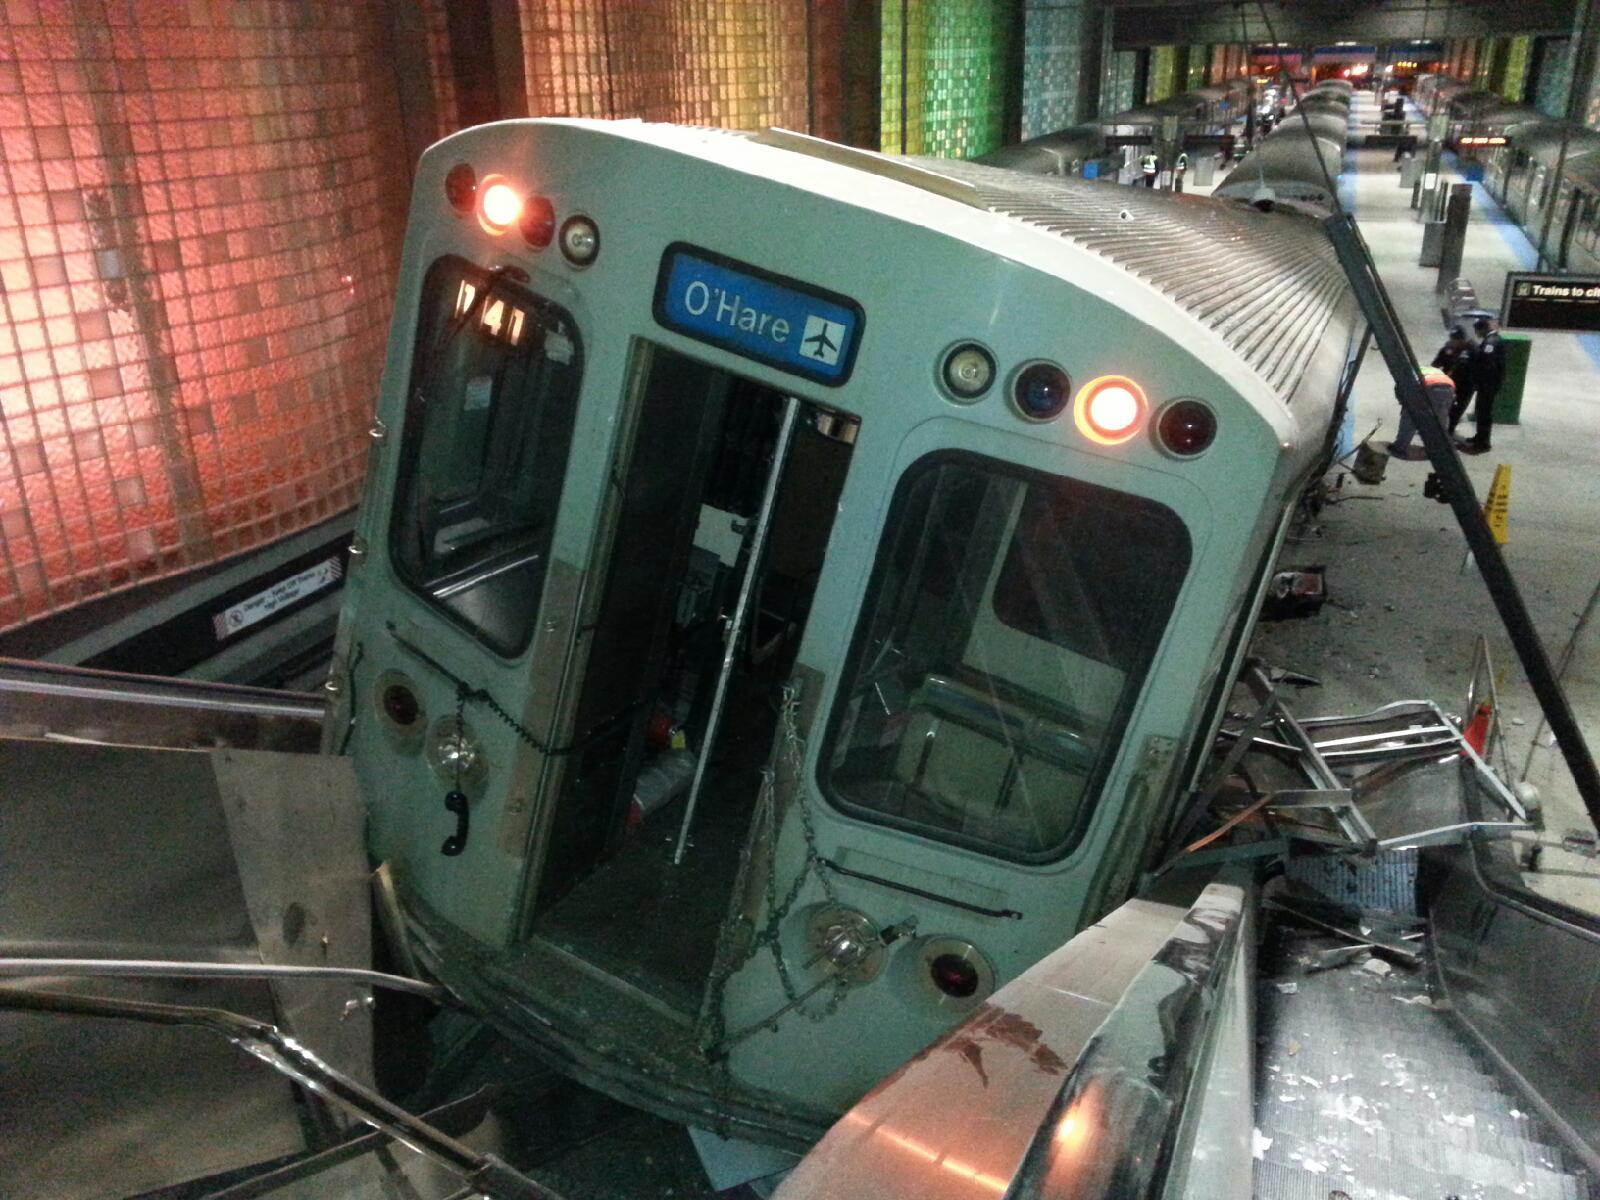 This CTA train smashed into the escalator on Monday morning at the O'Hare station. (Credit: CBS)